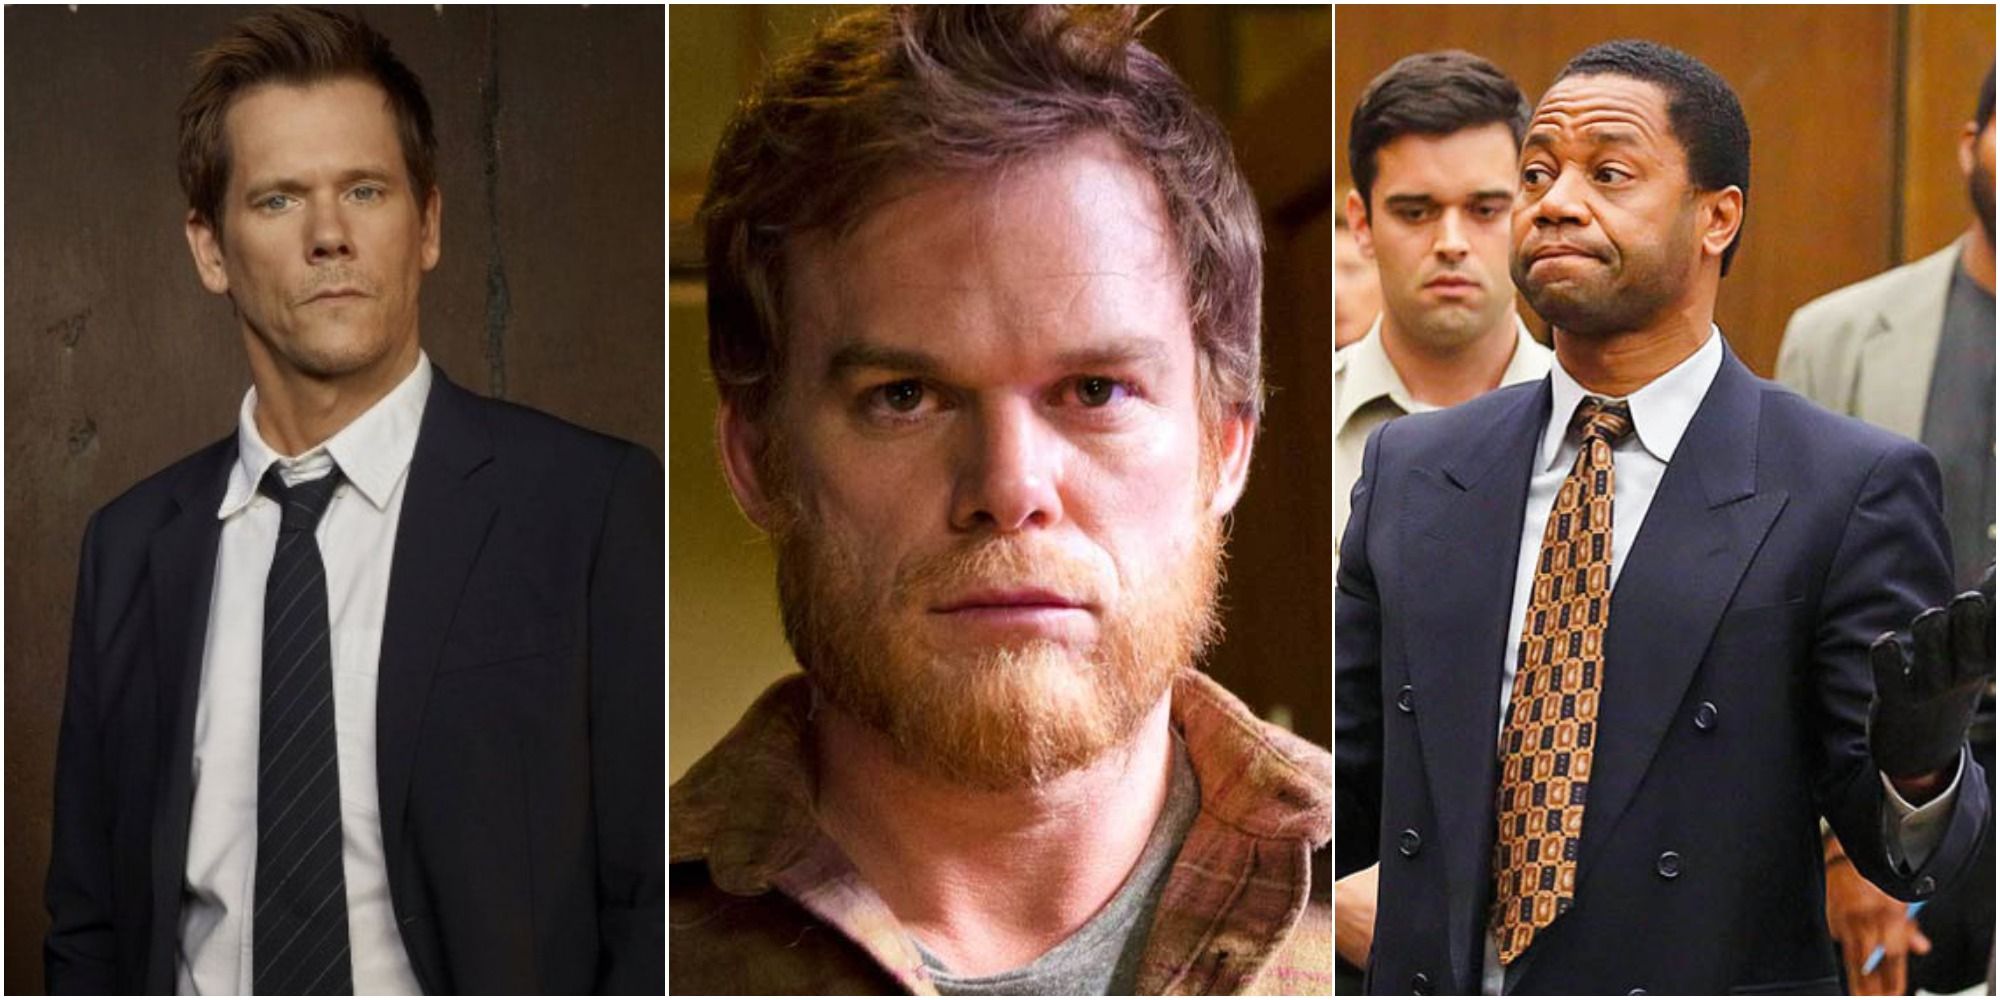 15 Crime Shows To Watch If You Liked Dexter